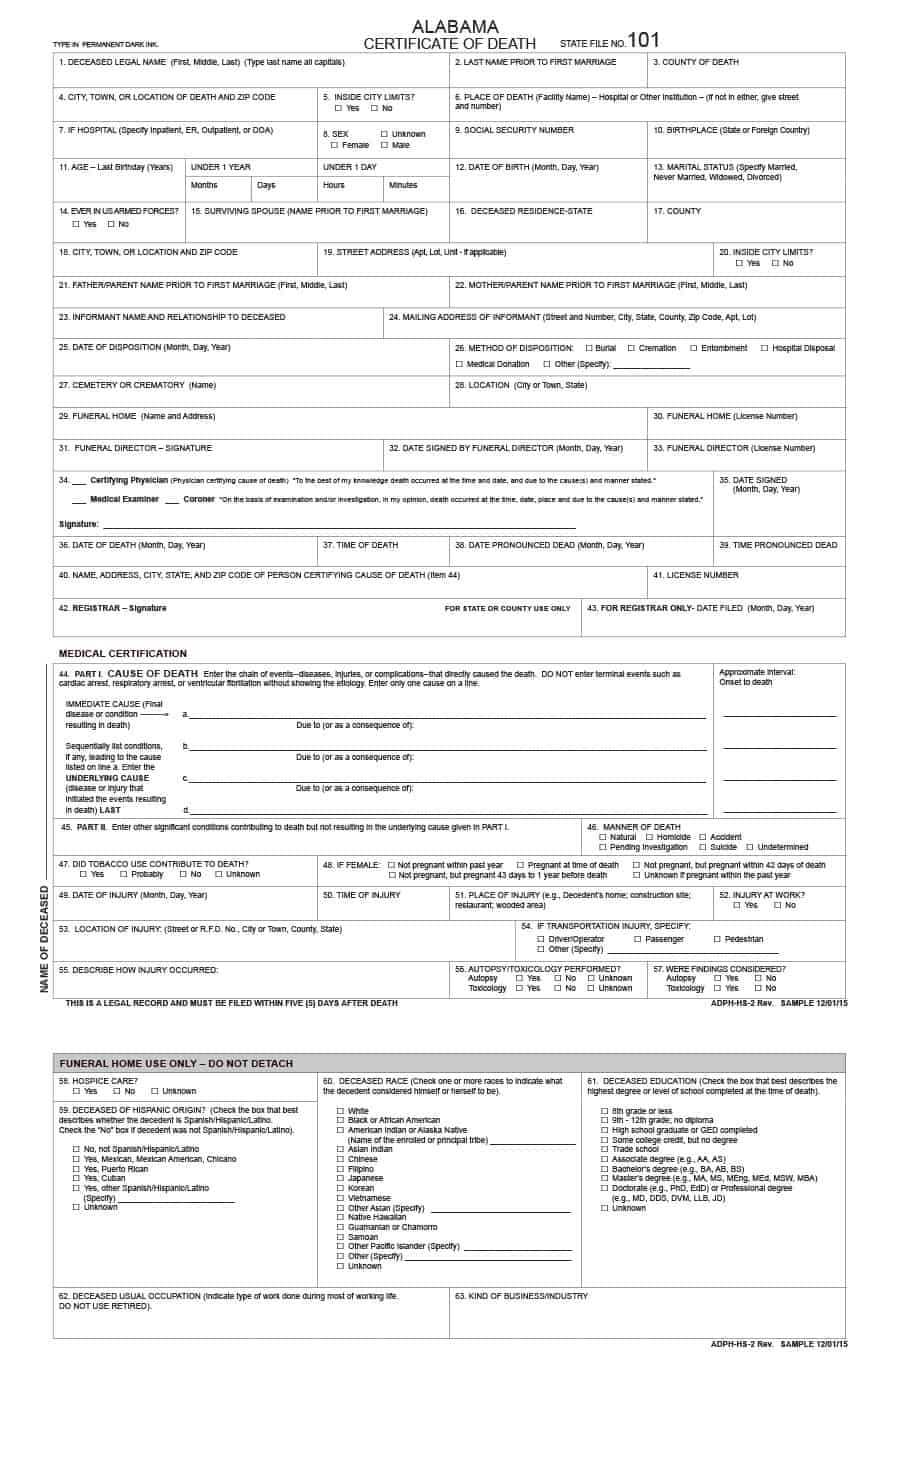 37 Blank Death Certificate Templates [100% Free] ᐅ Template Lab Regarding Fake Social Security Card Template Download